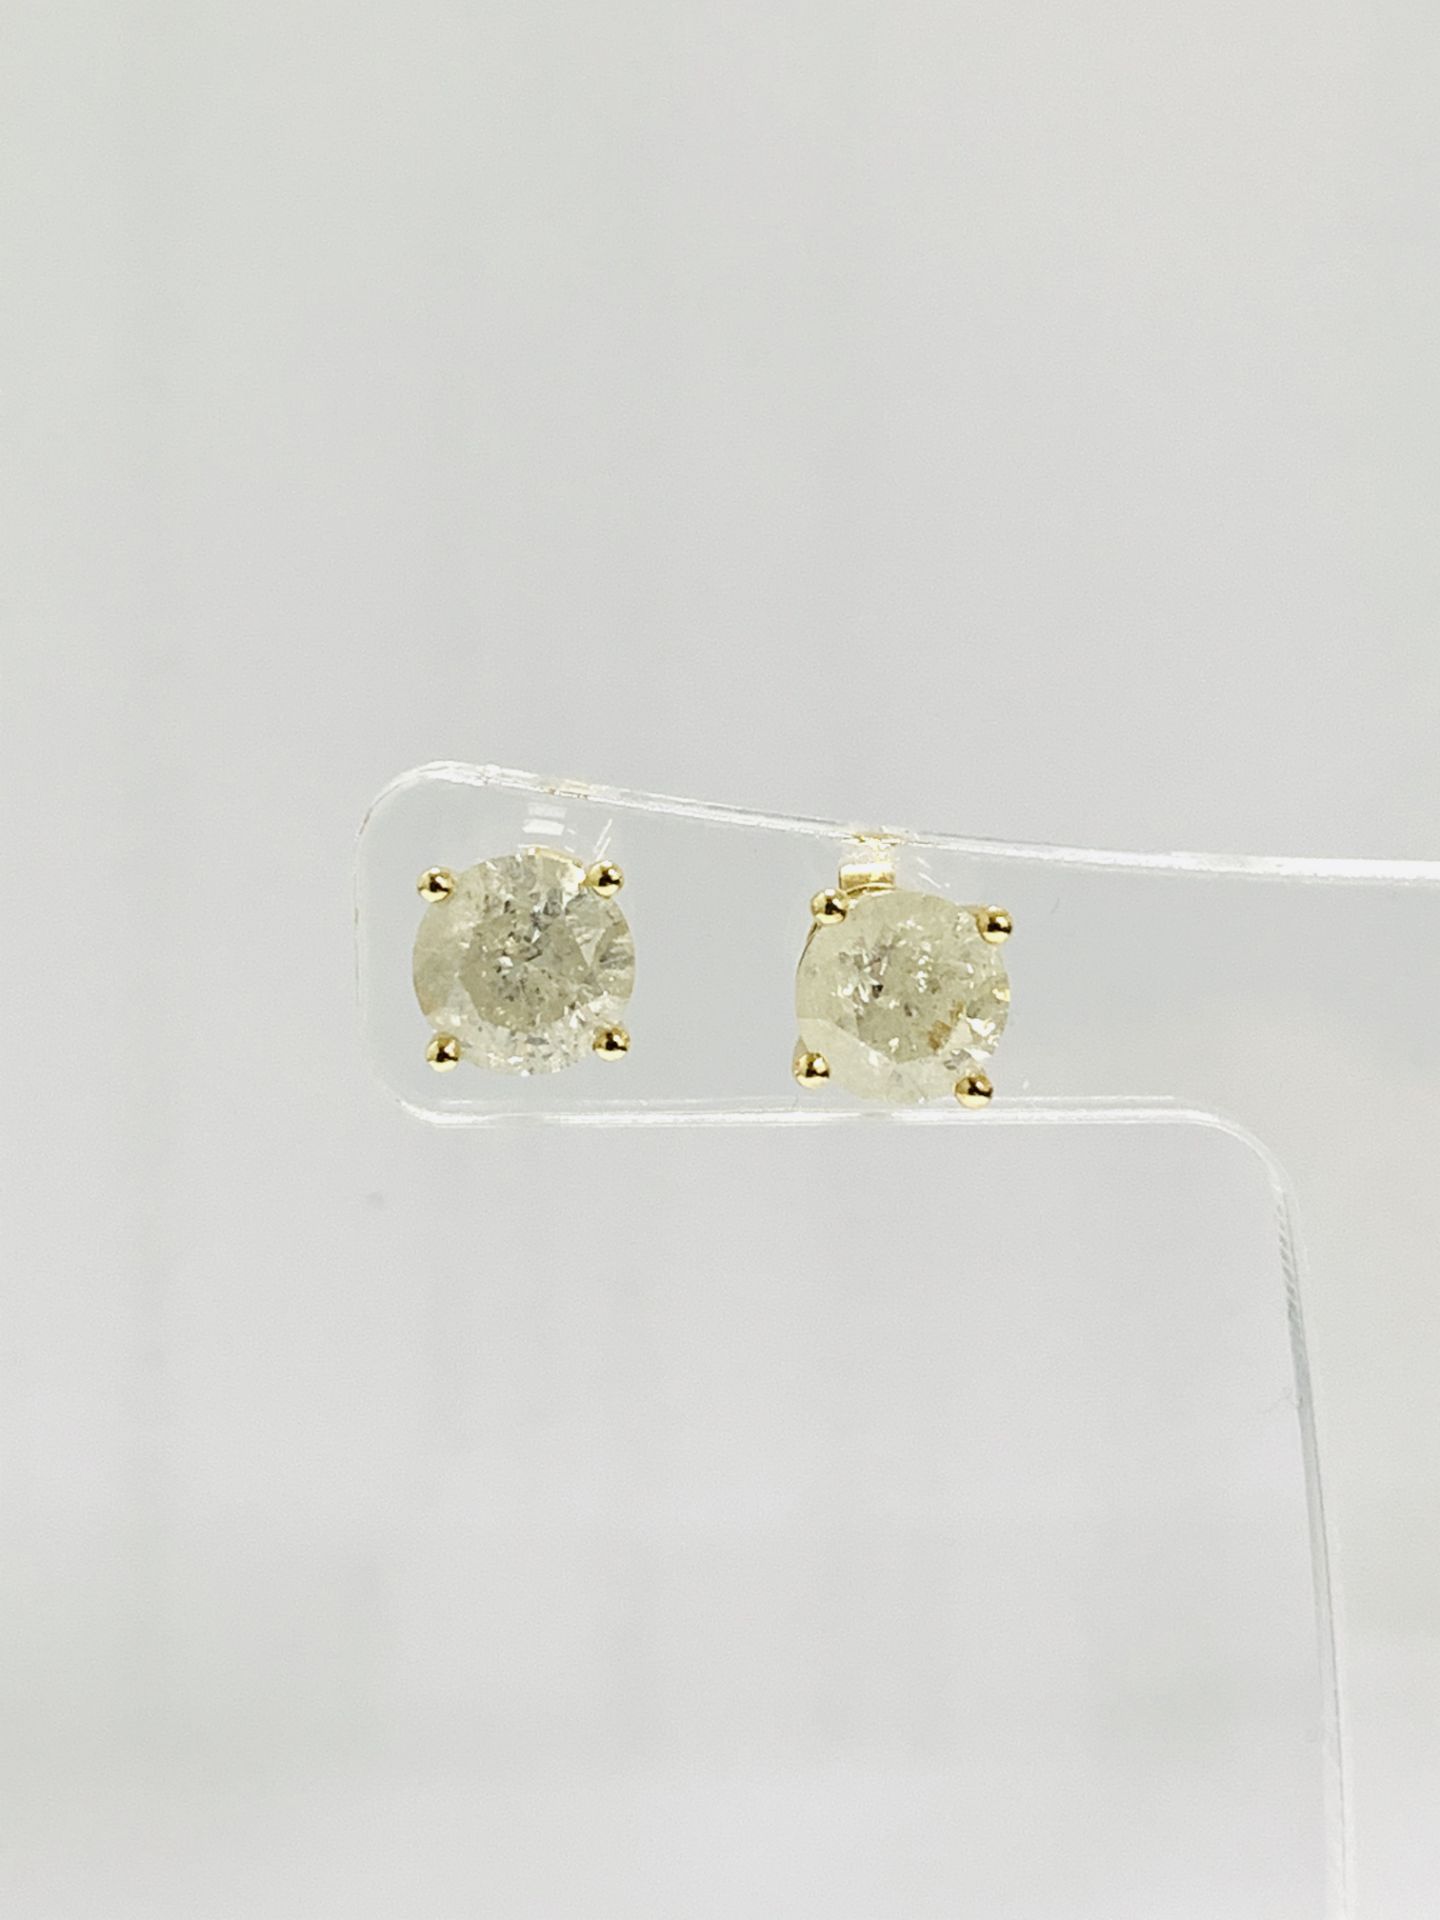 14K Yellow Gold Pair Of Earrings - Image 4 of 5